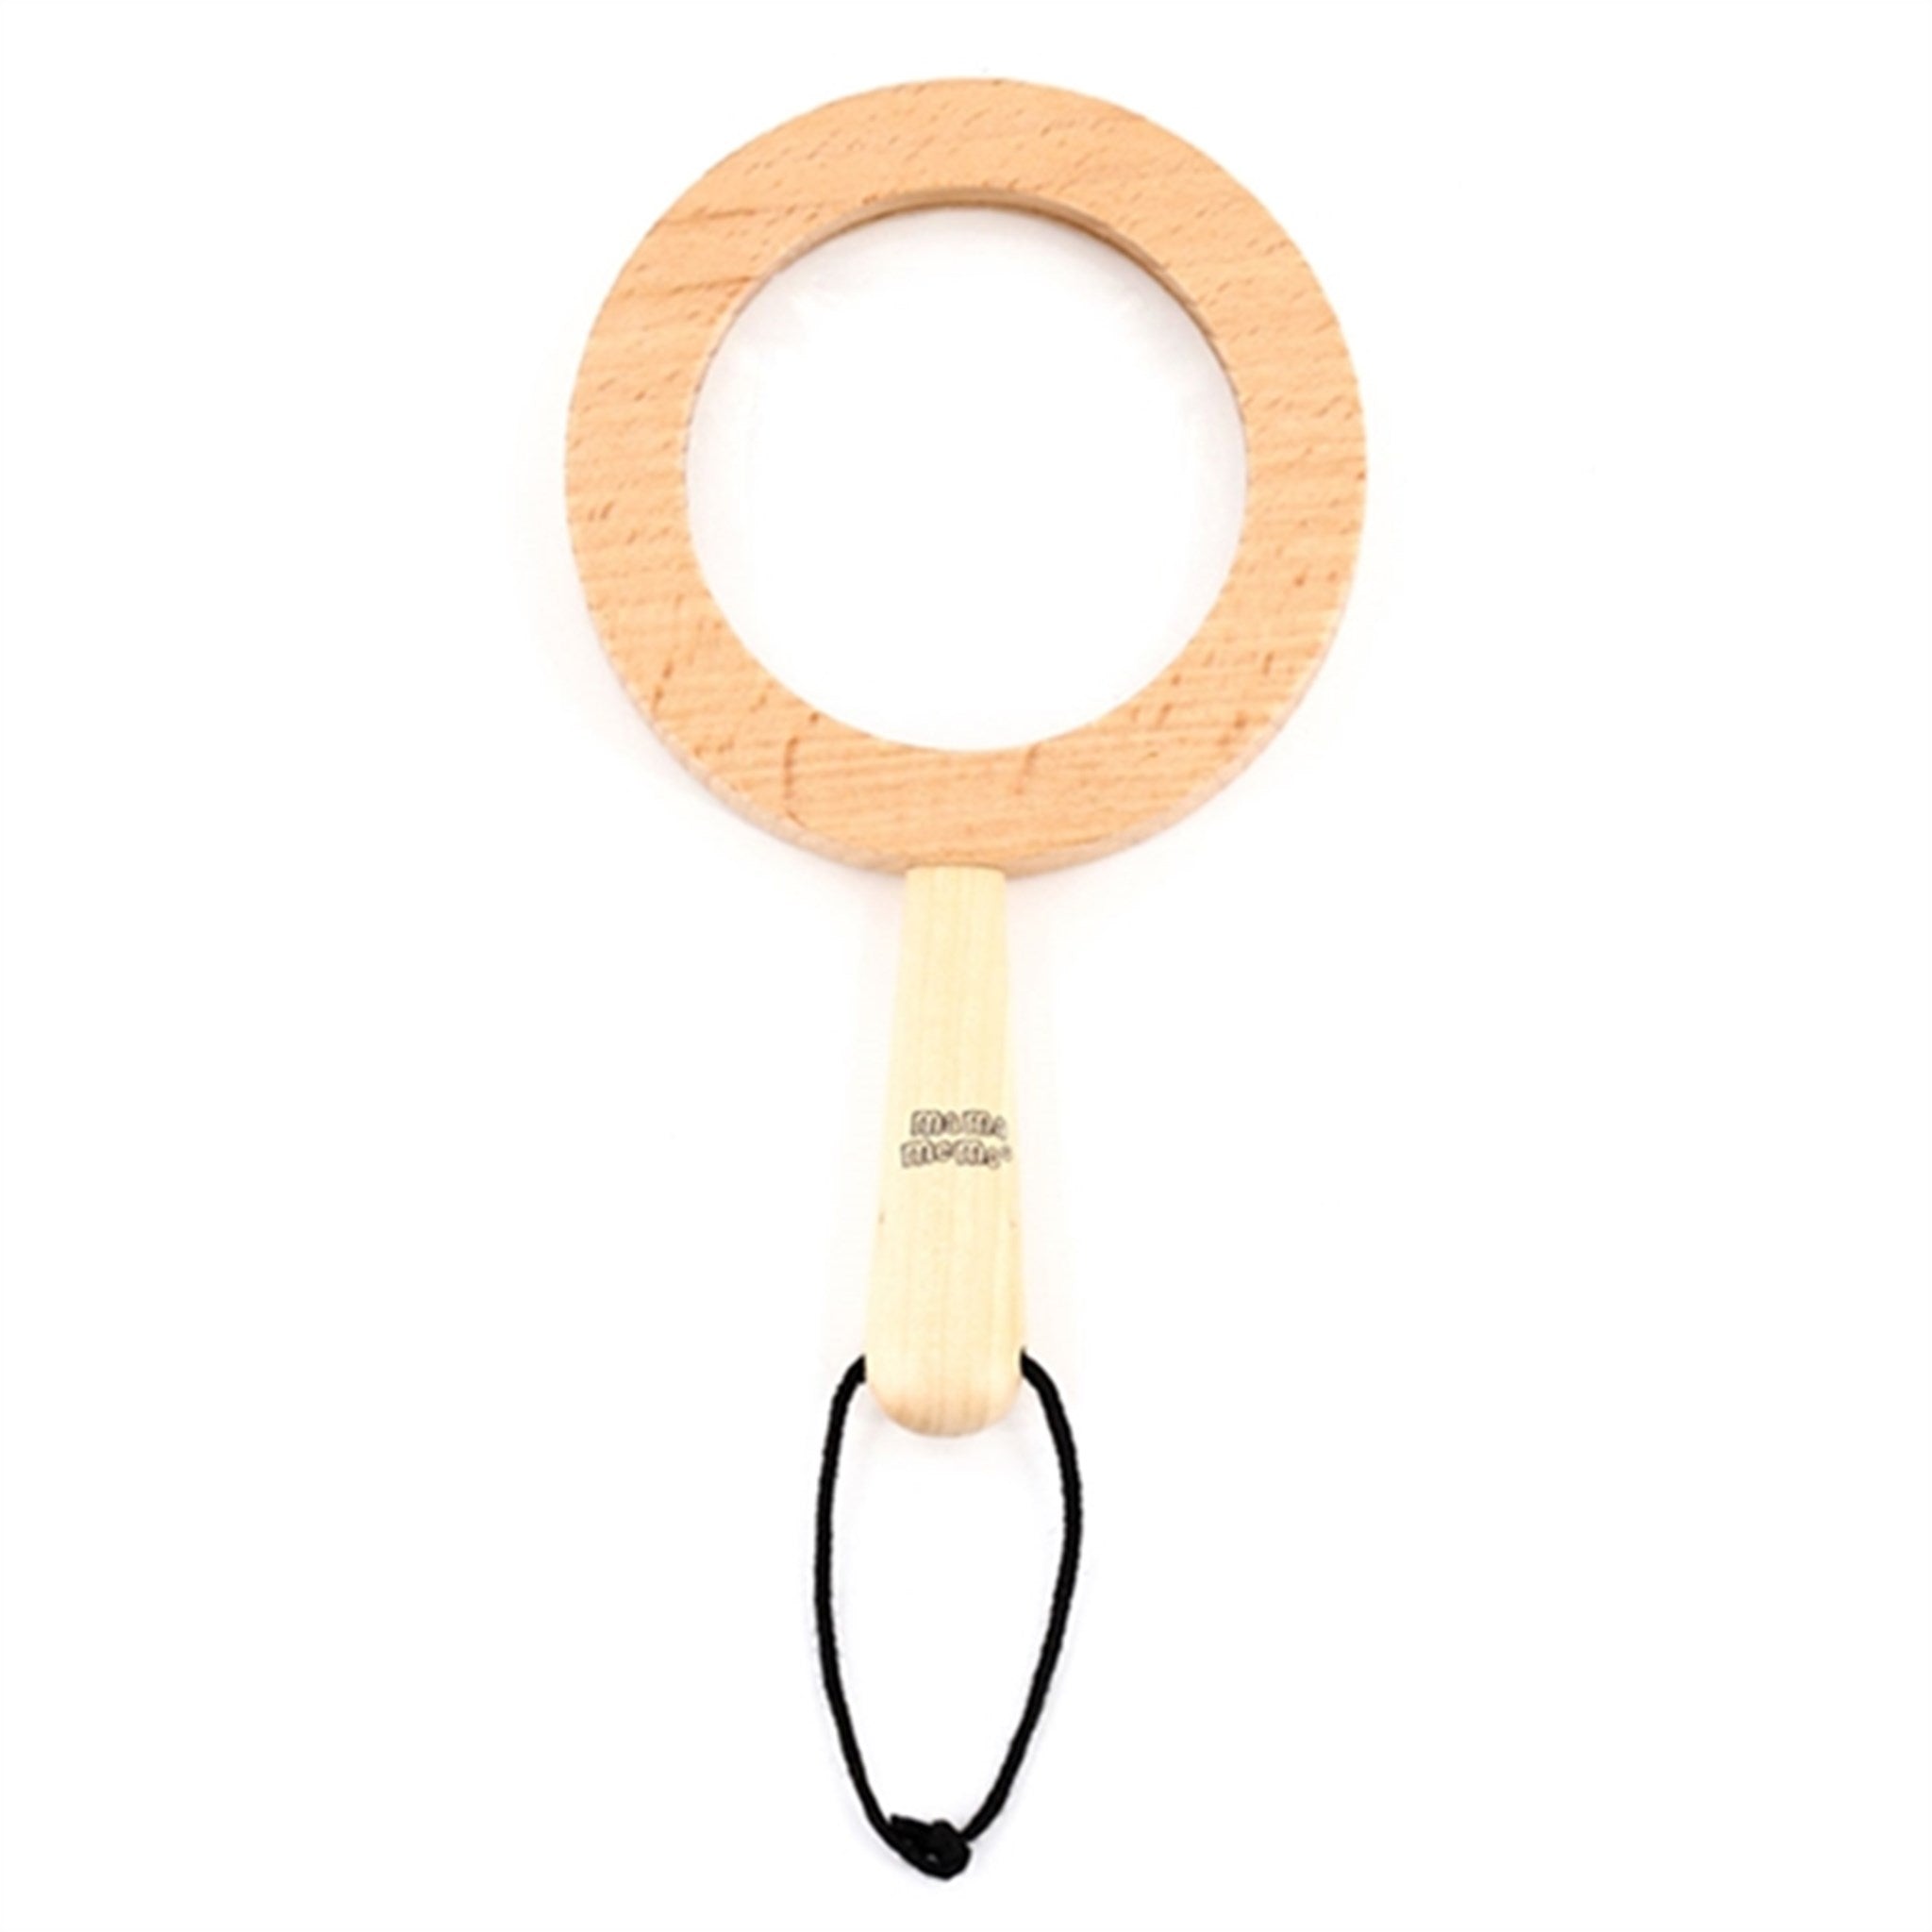 MaMaMeMo Magnifying Glass